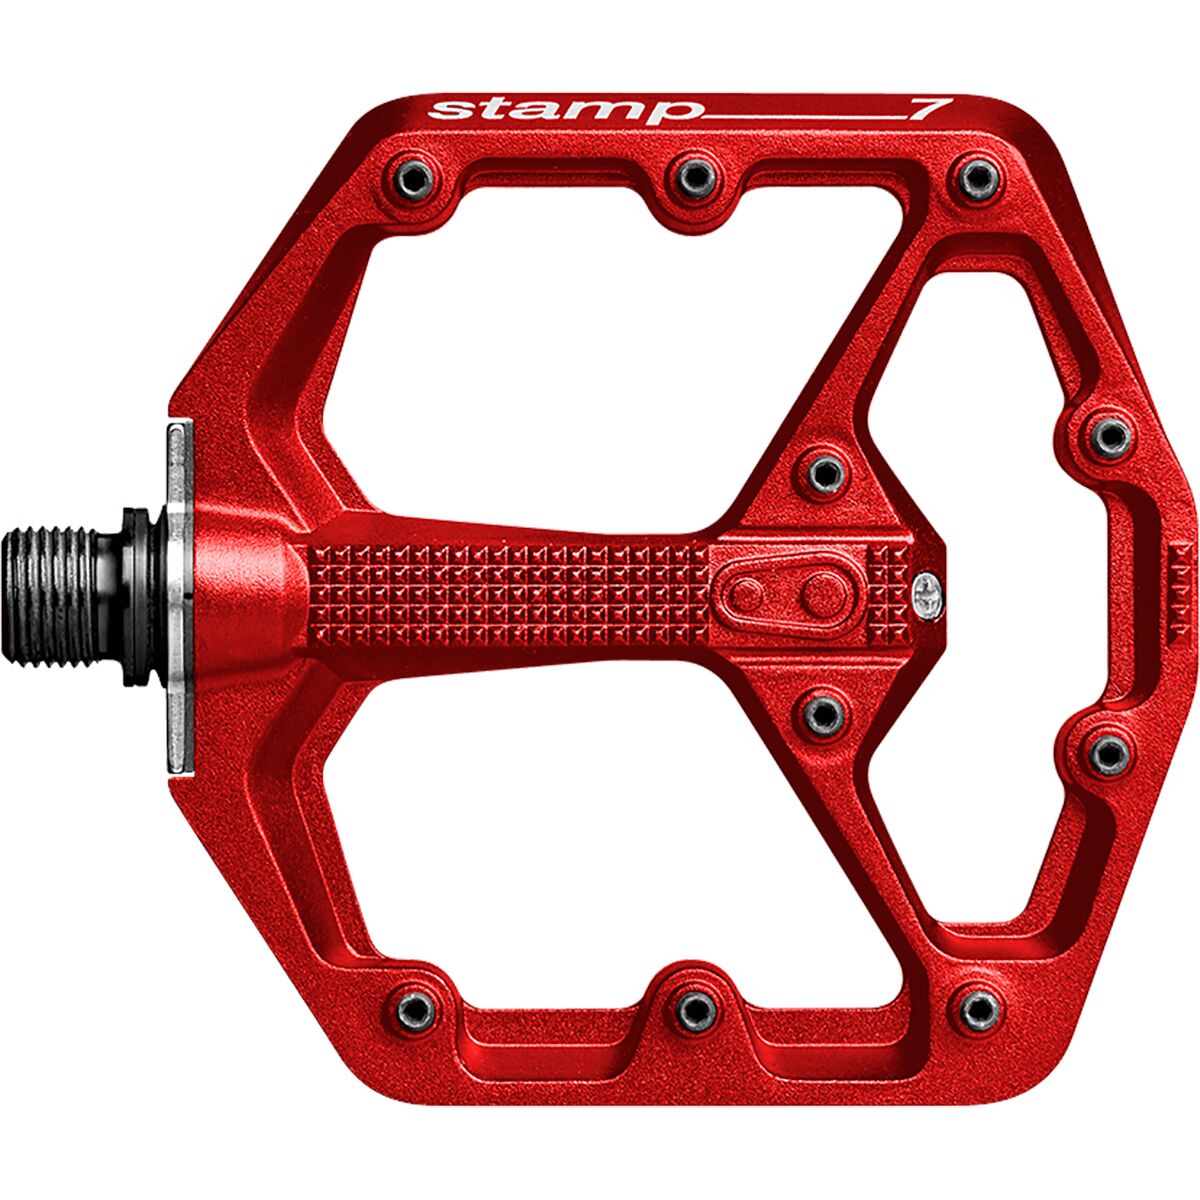 Crank Brothers Stamp 7 Pedals - Components